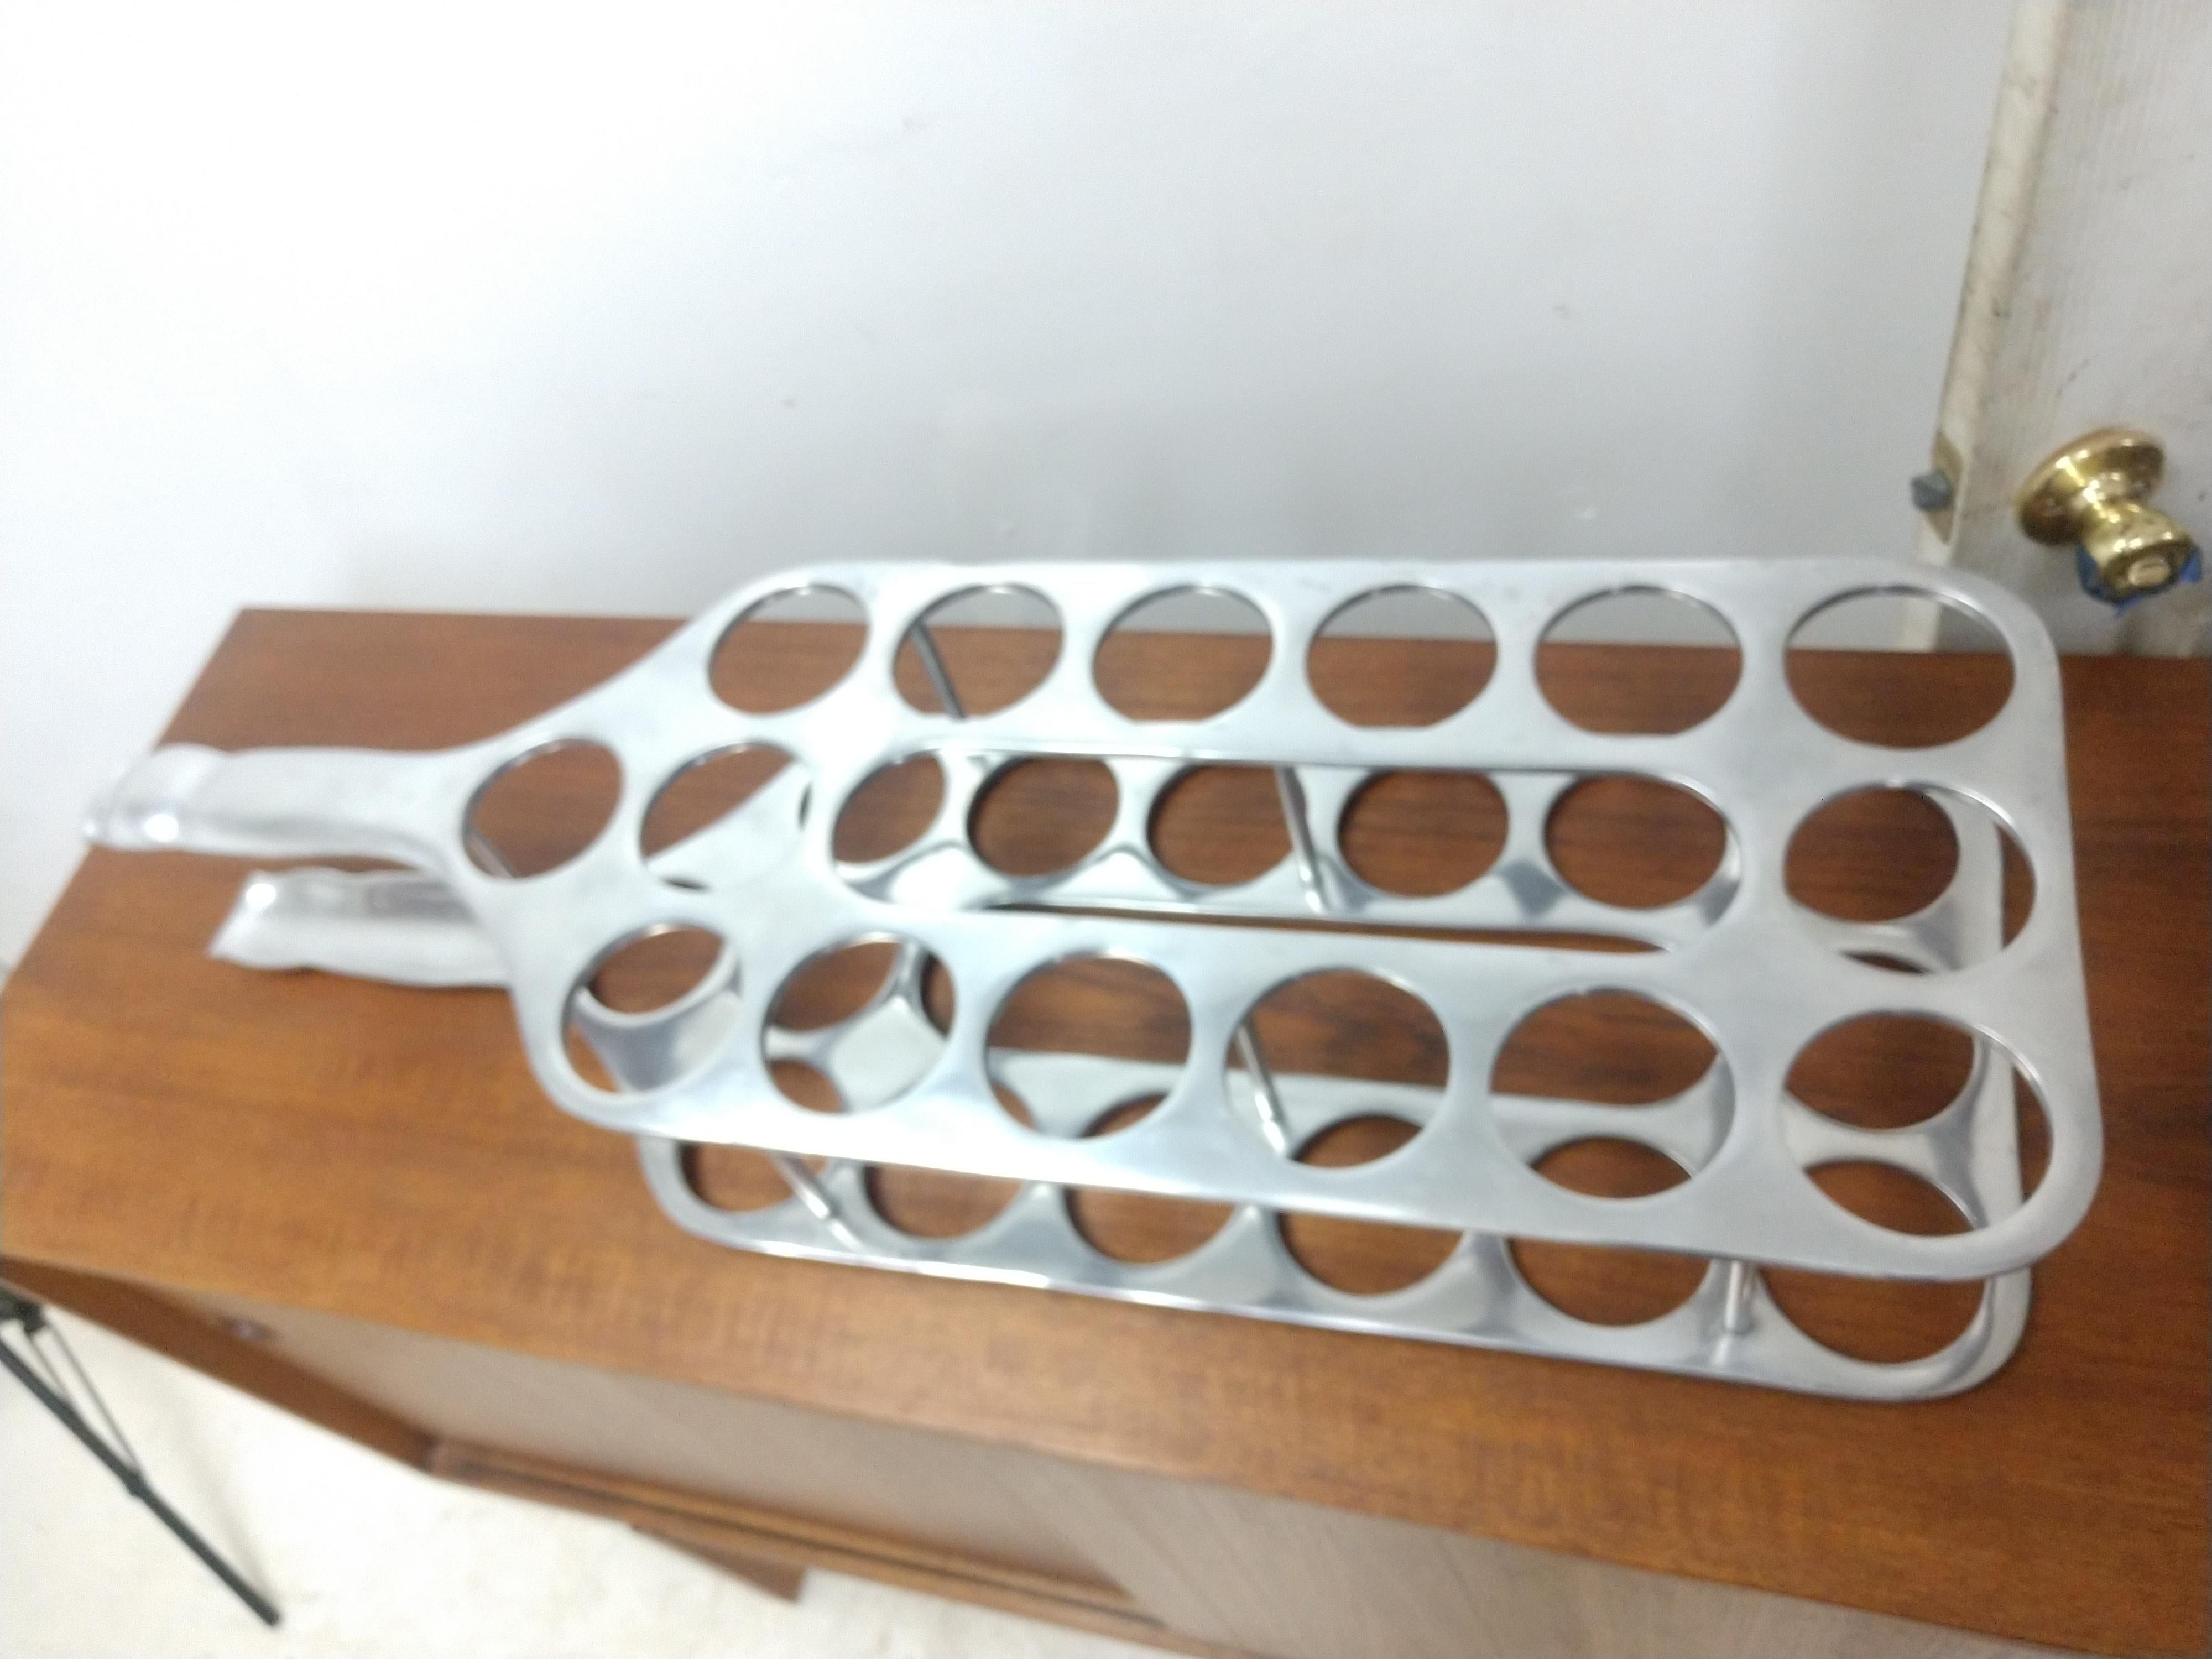 Simple, elegant and playful in the shape of a tall bottle. This cast aluminum wine rack can sit on the floor or on the bar. Holds 15 bottles of your favorites. This item can be parcel posted inexpensively.